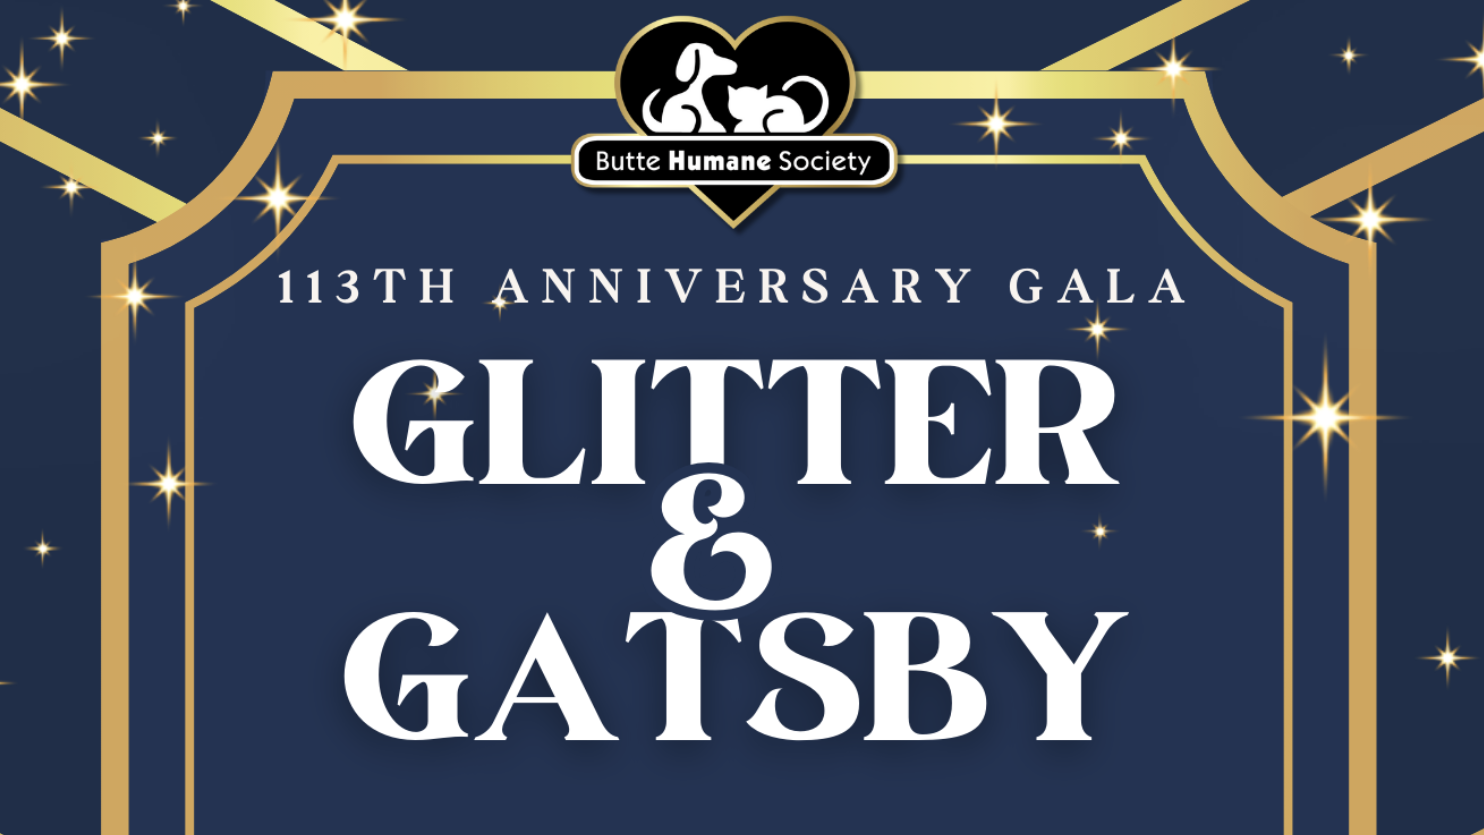 Welcome to the Glitter & Gatsby Gala: a grand spectacle meticulously crafted to mark the venerable 113th anniversary of Butte Humane Society. Revel in the opulence of the art deco-inspired design, where sophisticated navy blue plays backdrop to gleaming gold frames and twinkling stars.